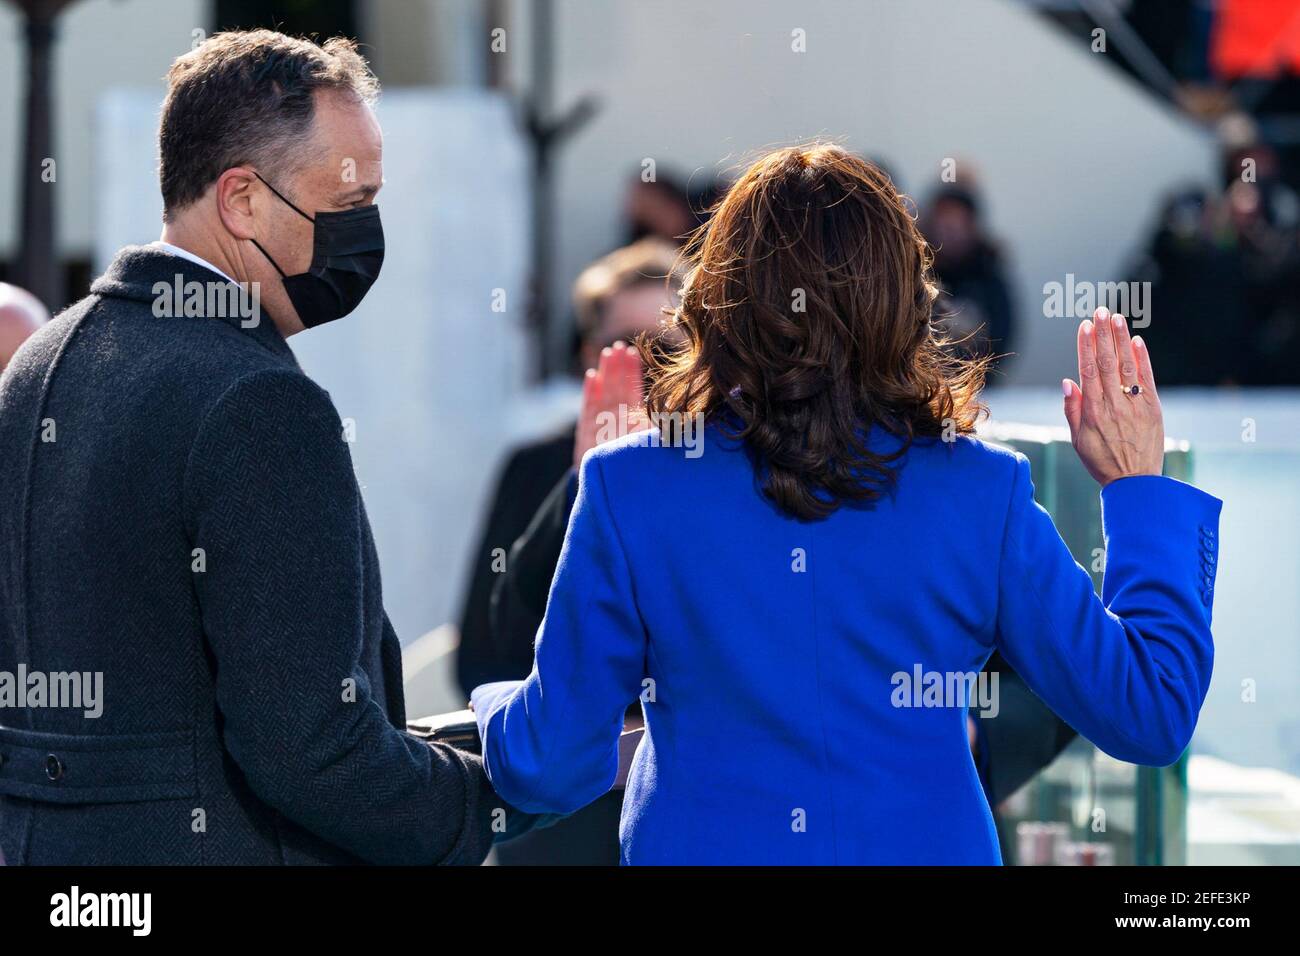 Vice President Kamala Harris, joined by her husband Mr. Doug Emhoff, is sworn in as Vice President of the United States by Supreme Court Justice Sonia Sotomayor Wednesday, Jan. 20, 2021, at the U.S. Capitol in Washington, D.C. Stock Photo